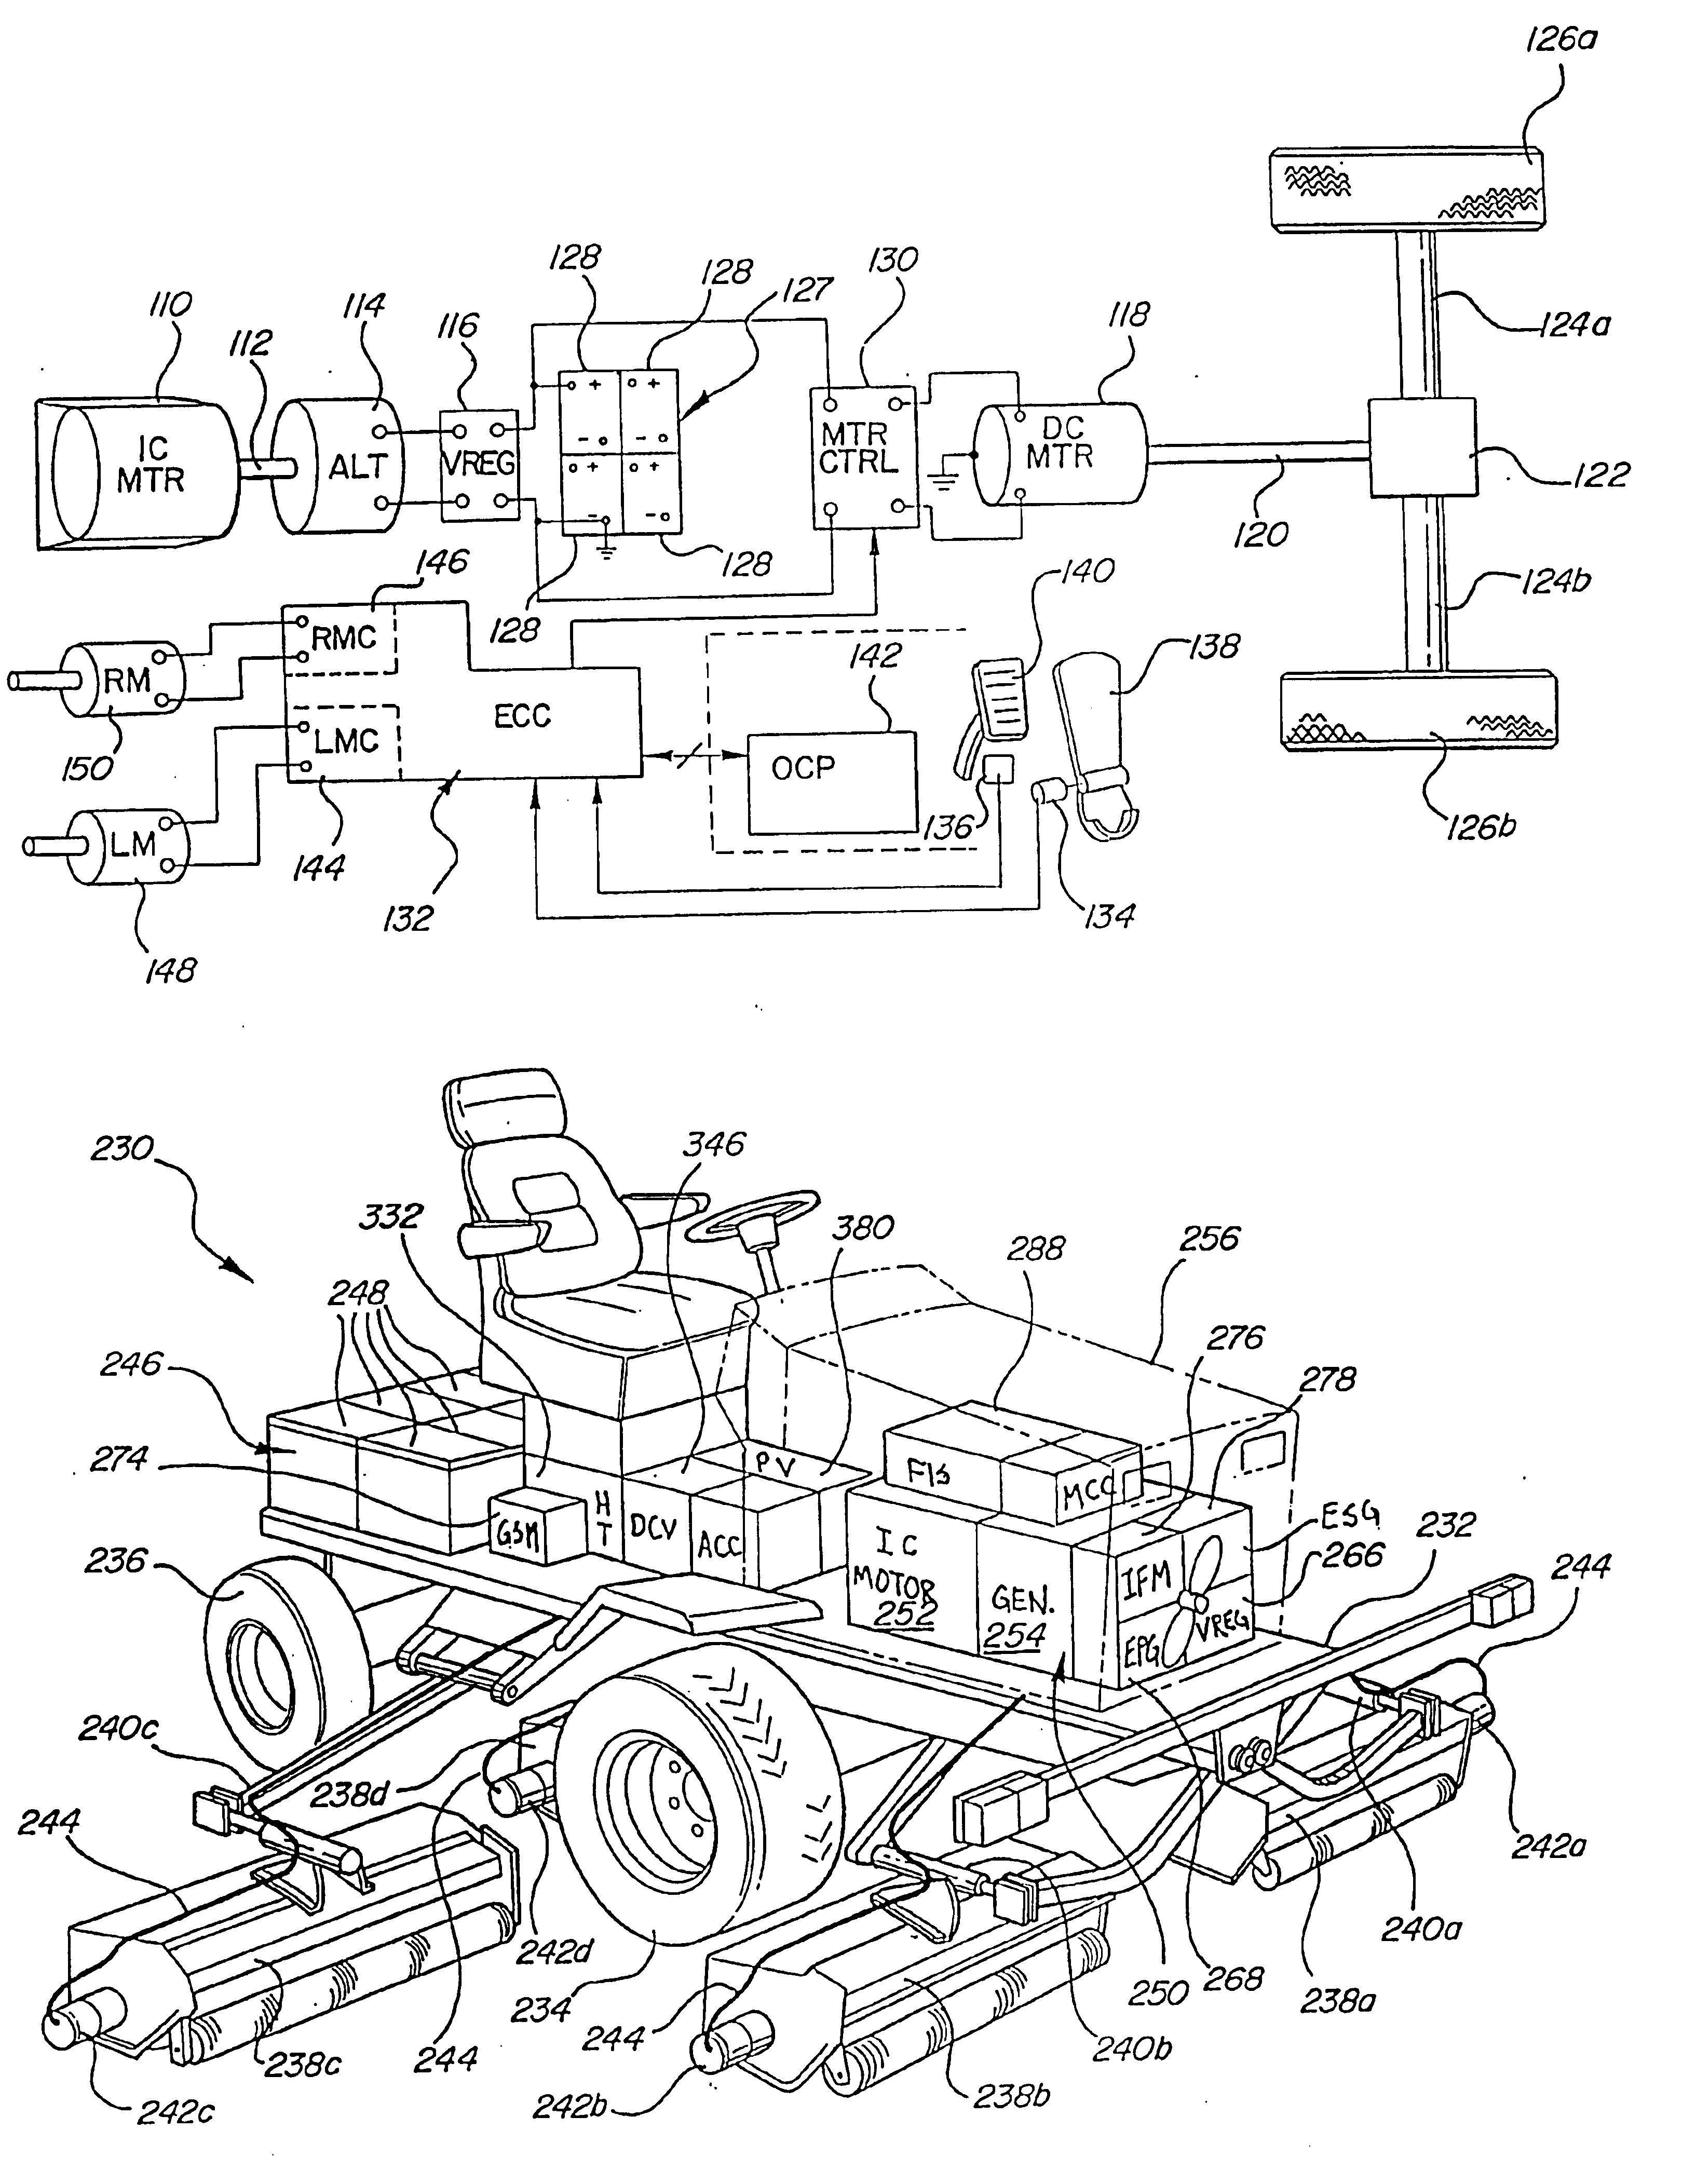 Electric riding mower with motor generator set and noise abatement